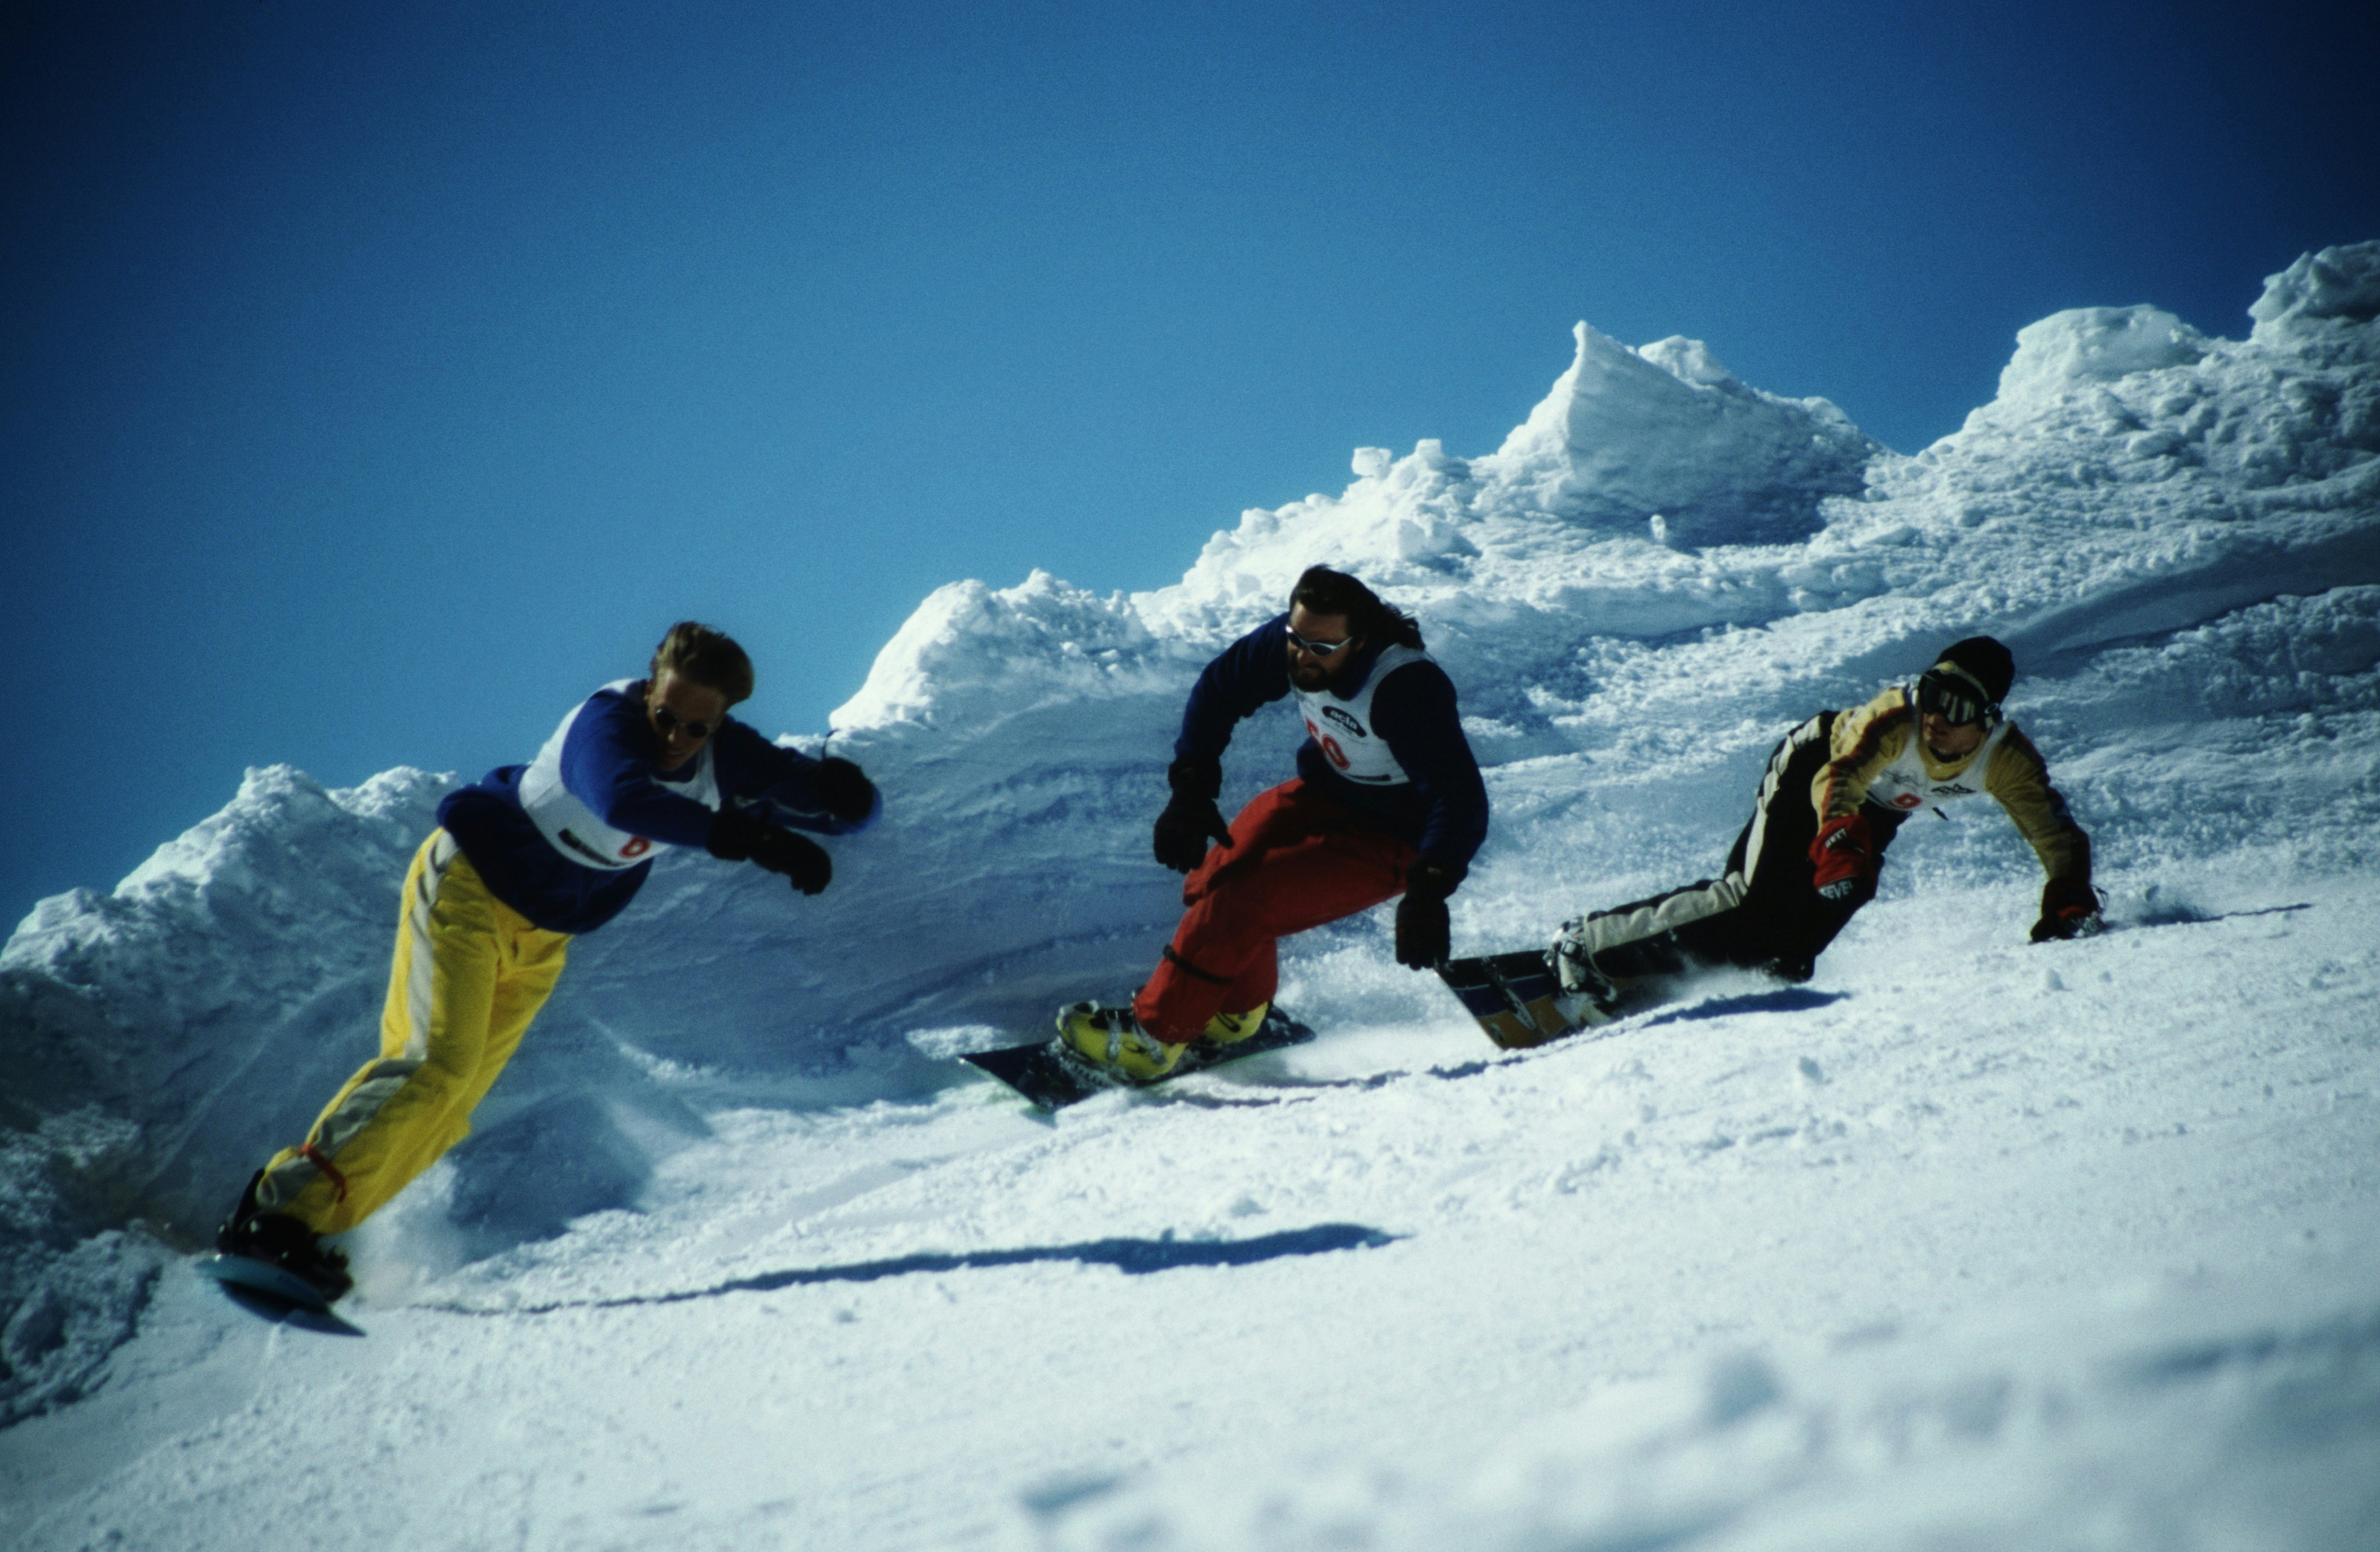 2 men in red and yellow jacket and black pants riding on snowboard during daytime